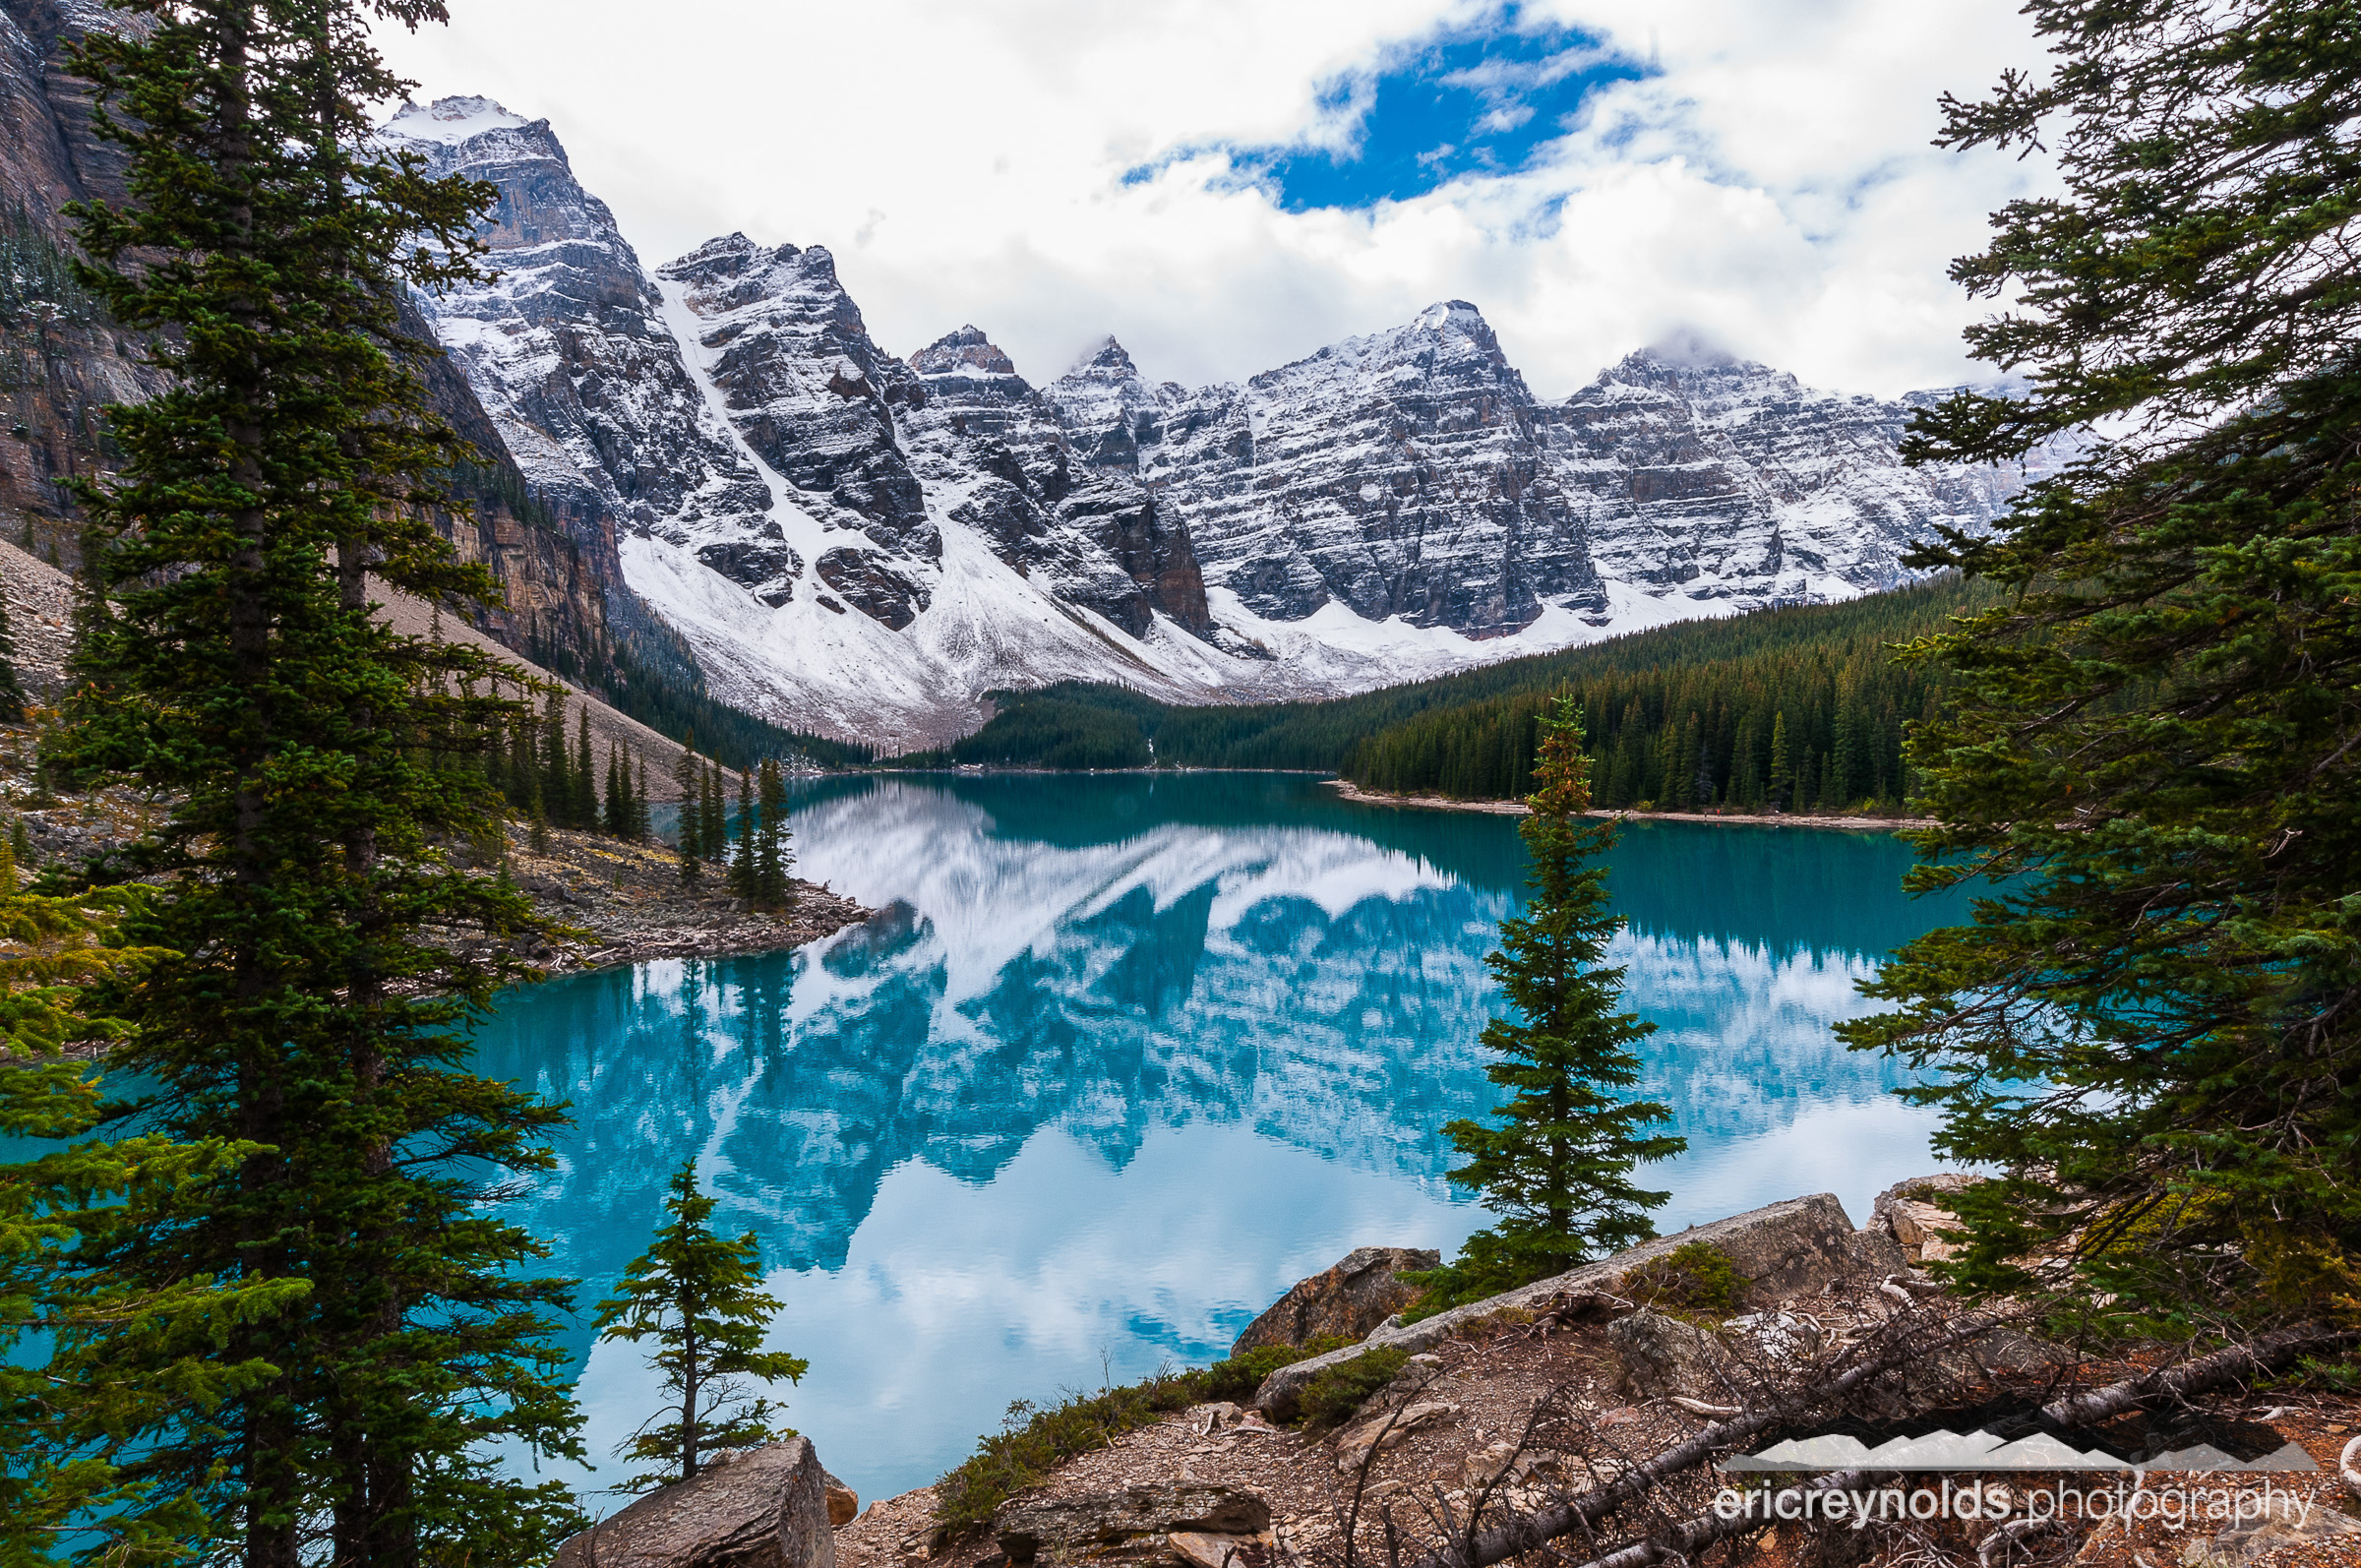 Mountain Reflection in Moraine Lake by Eric Reynolds - Landscape Photographer